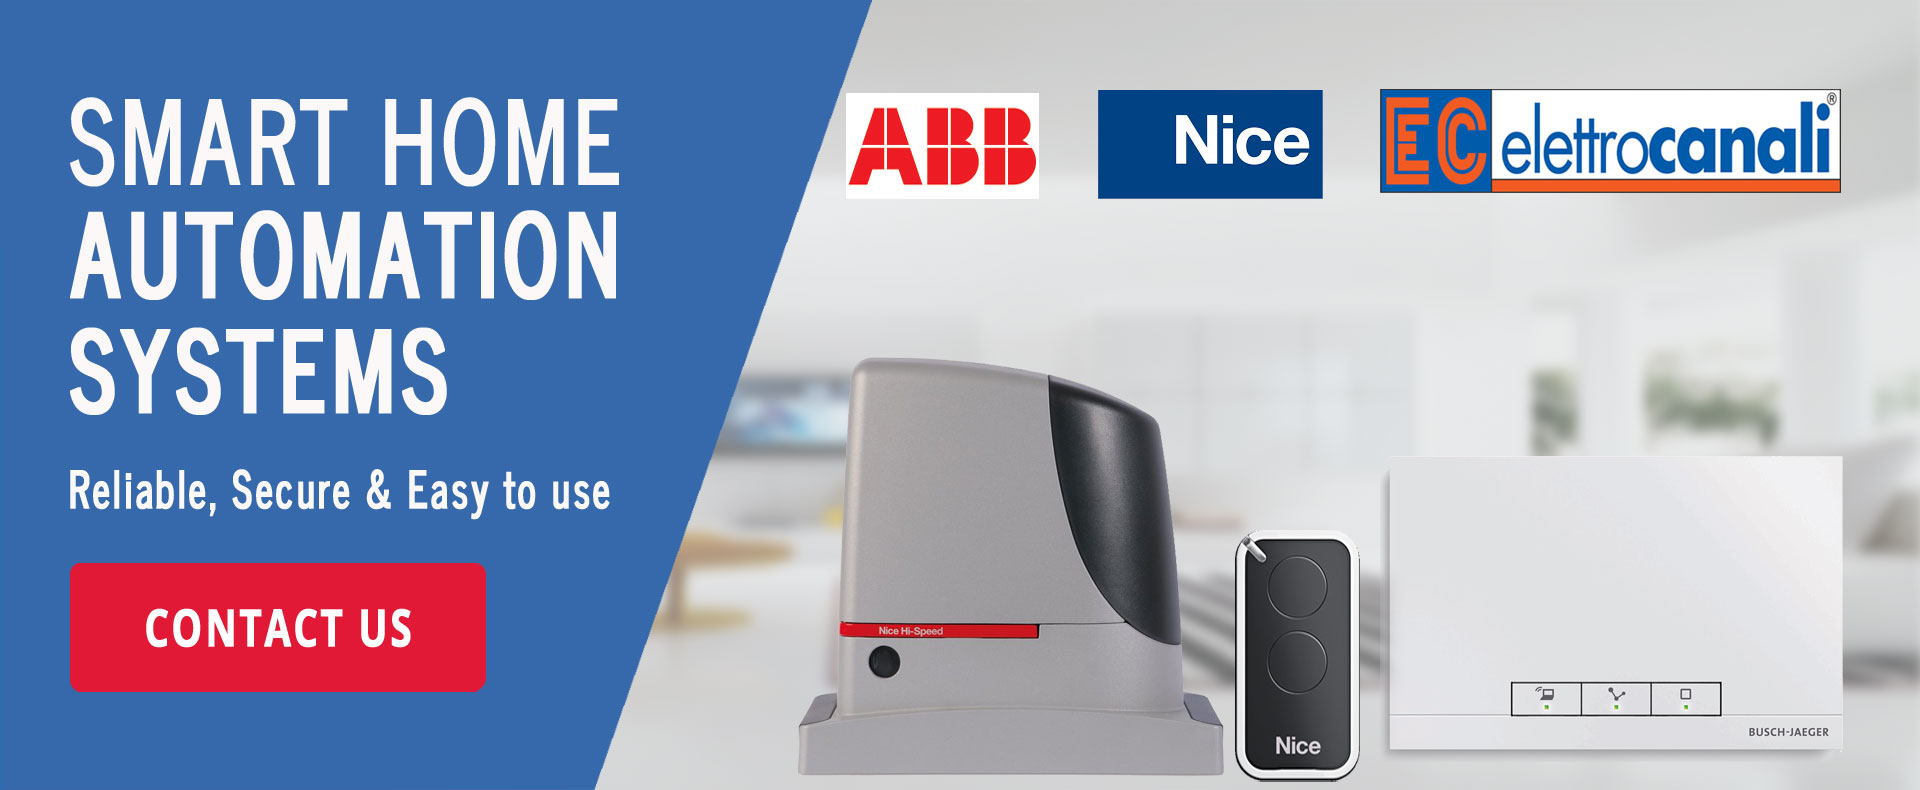 ABB-and-Nice-smarthome-products-lahore-pakistan